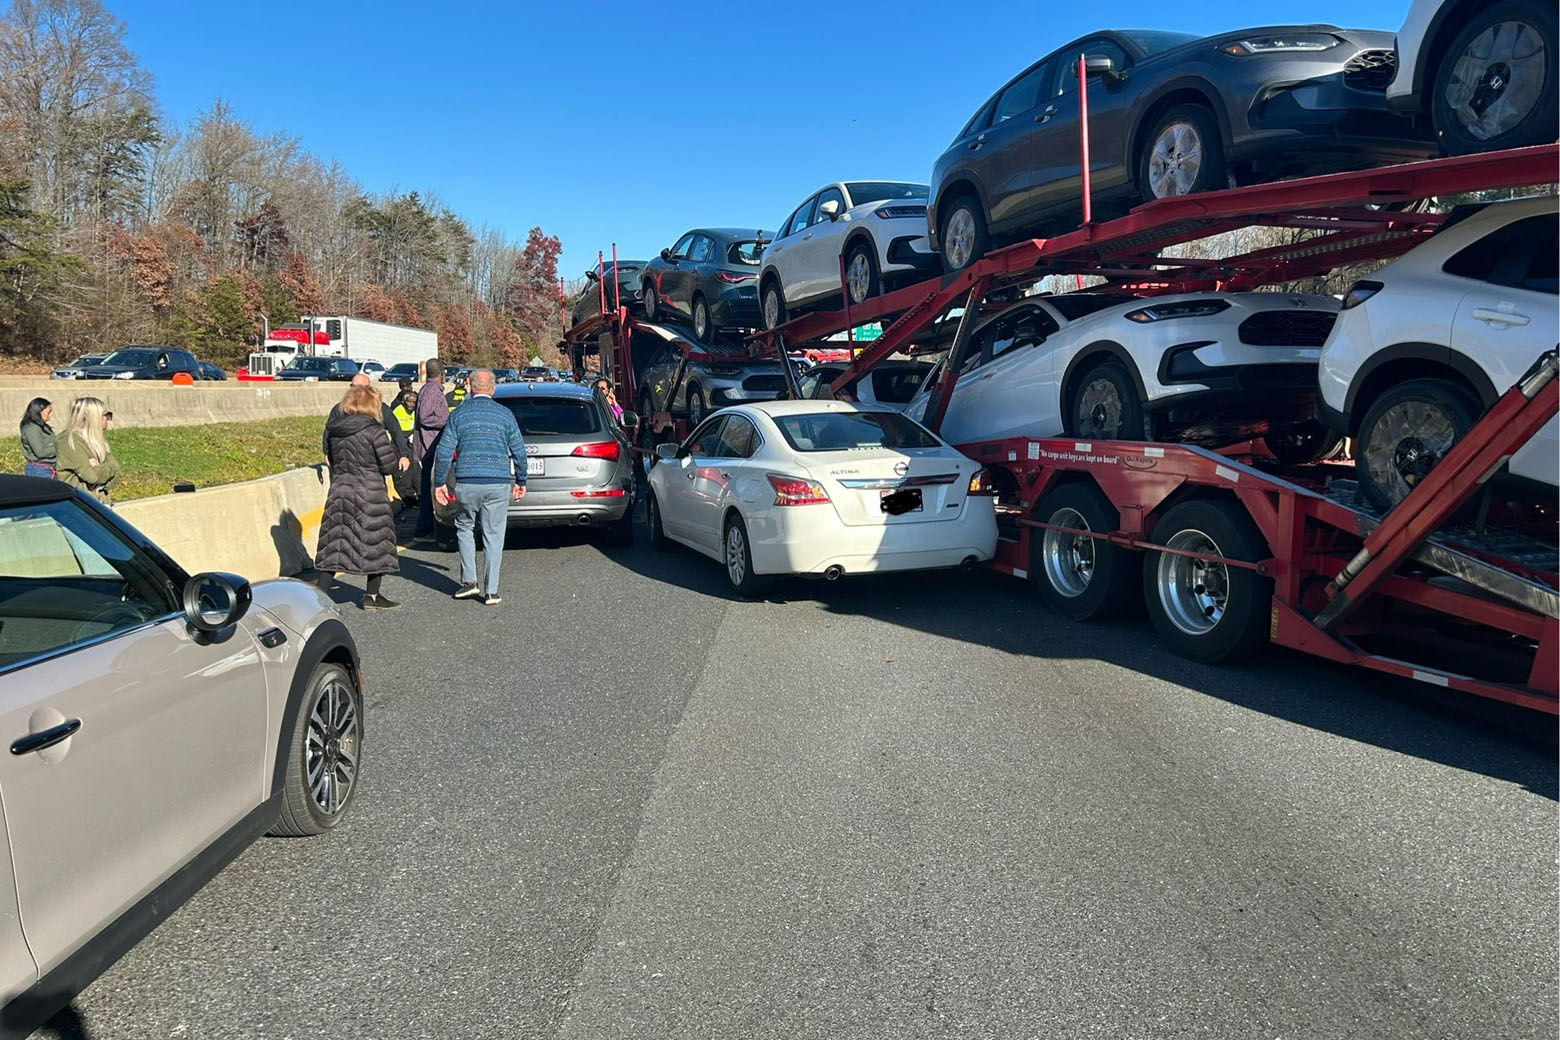 Two people were taken to the hospital after a crash involving at least 10 vehicles on Interstate 95 northeast of Baltimore, according to Maryland State Police. (Courtesy Harford County Fire and EMS/Joppa-Magnolia VFC)